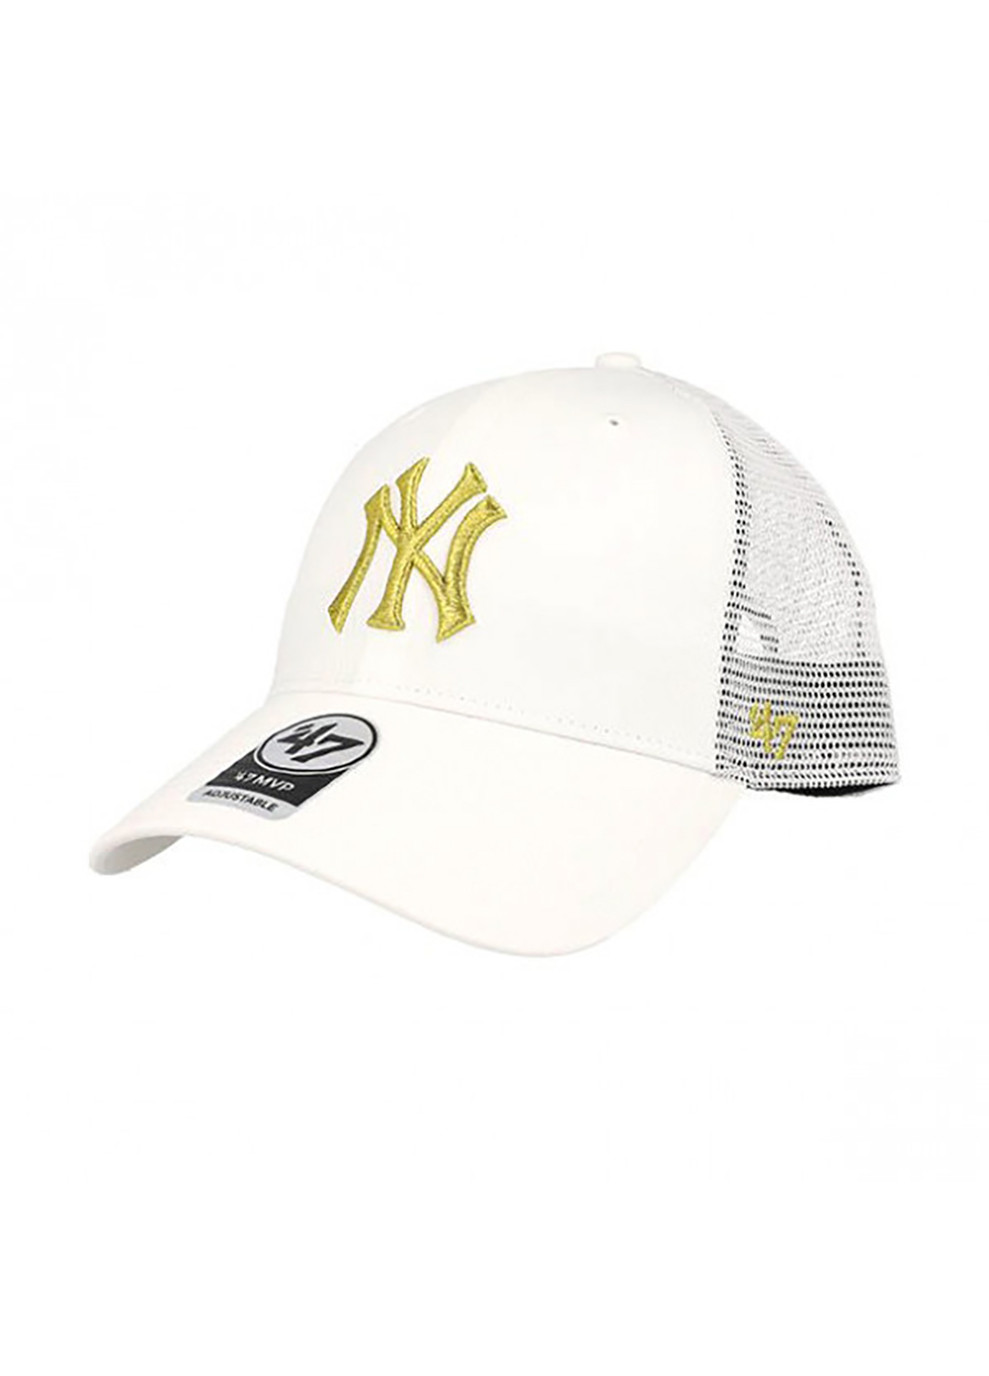 Кепка-тракер NY YANKEES One Size White/Gold B-BRMTL17CTP-WH 47 Brand (253677530)